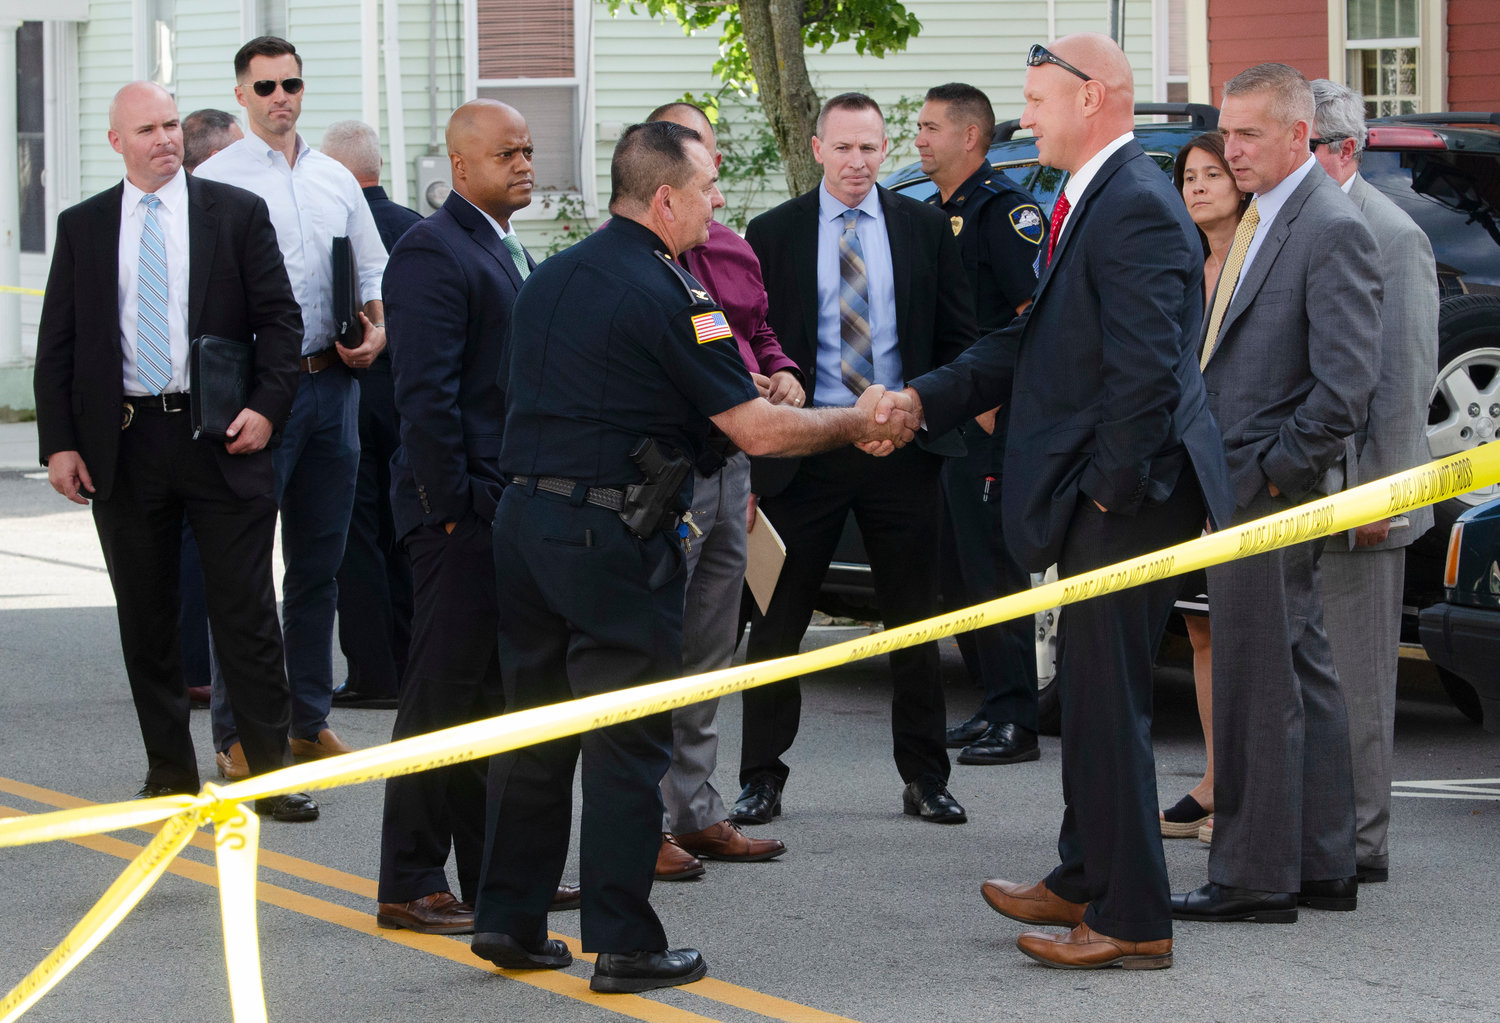 Warren Police Chief Roy Borges meets State Police officials at the scene of a shooting on Water Street.